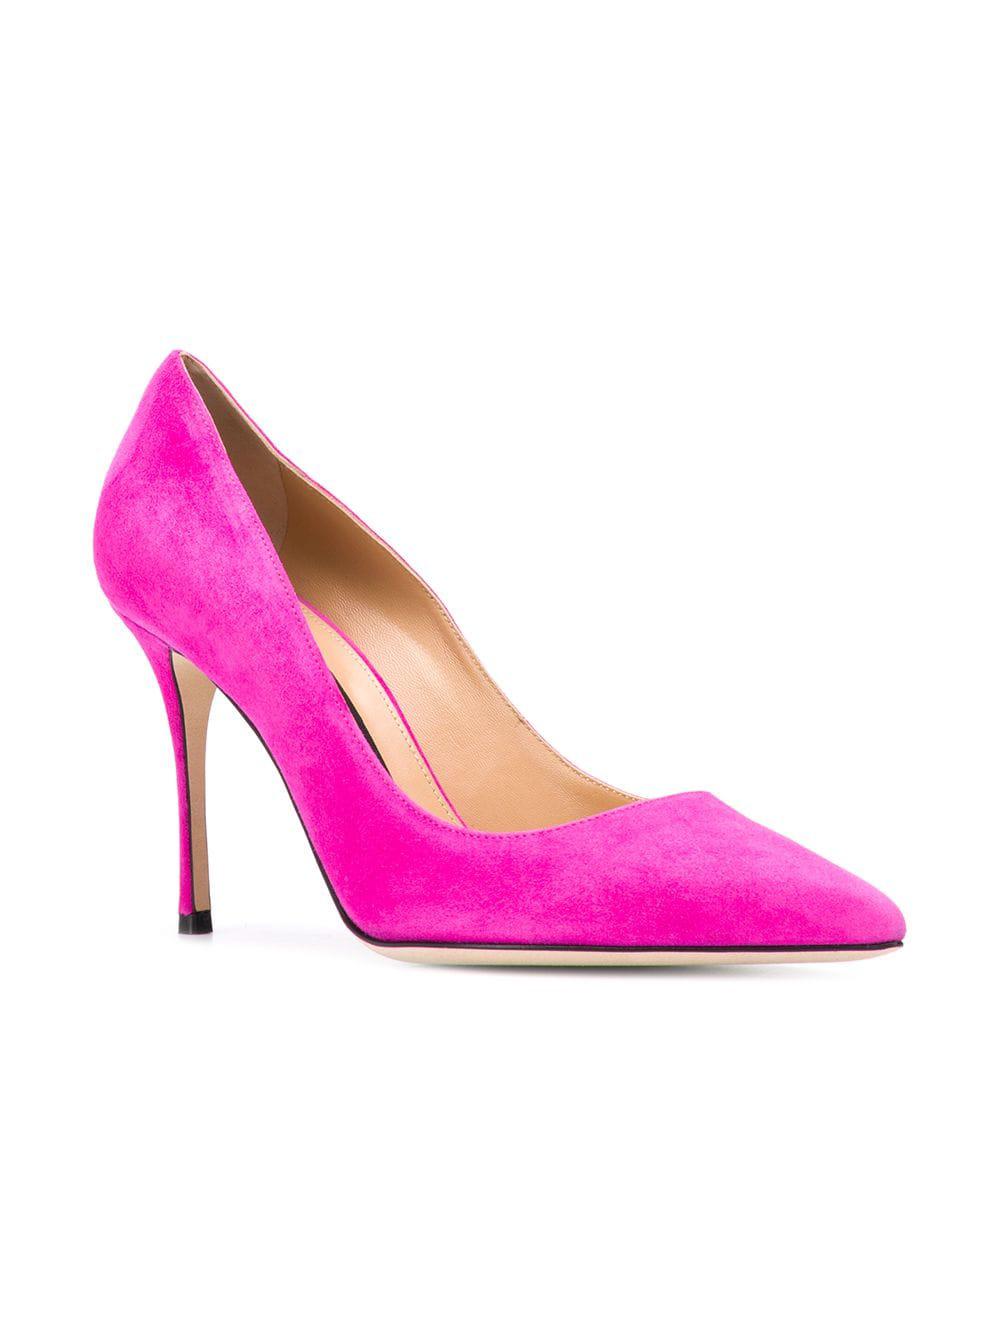 Sergio Rossi Suede Godiva Pointed Pumps in Pink - Lyst